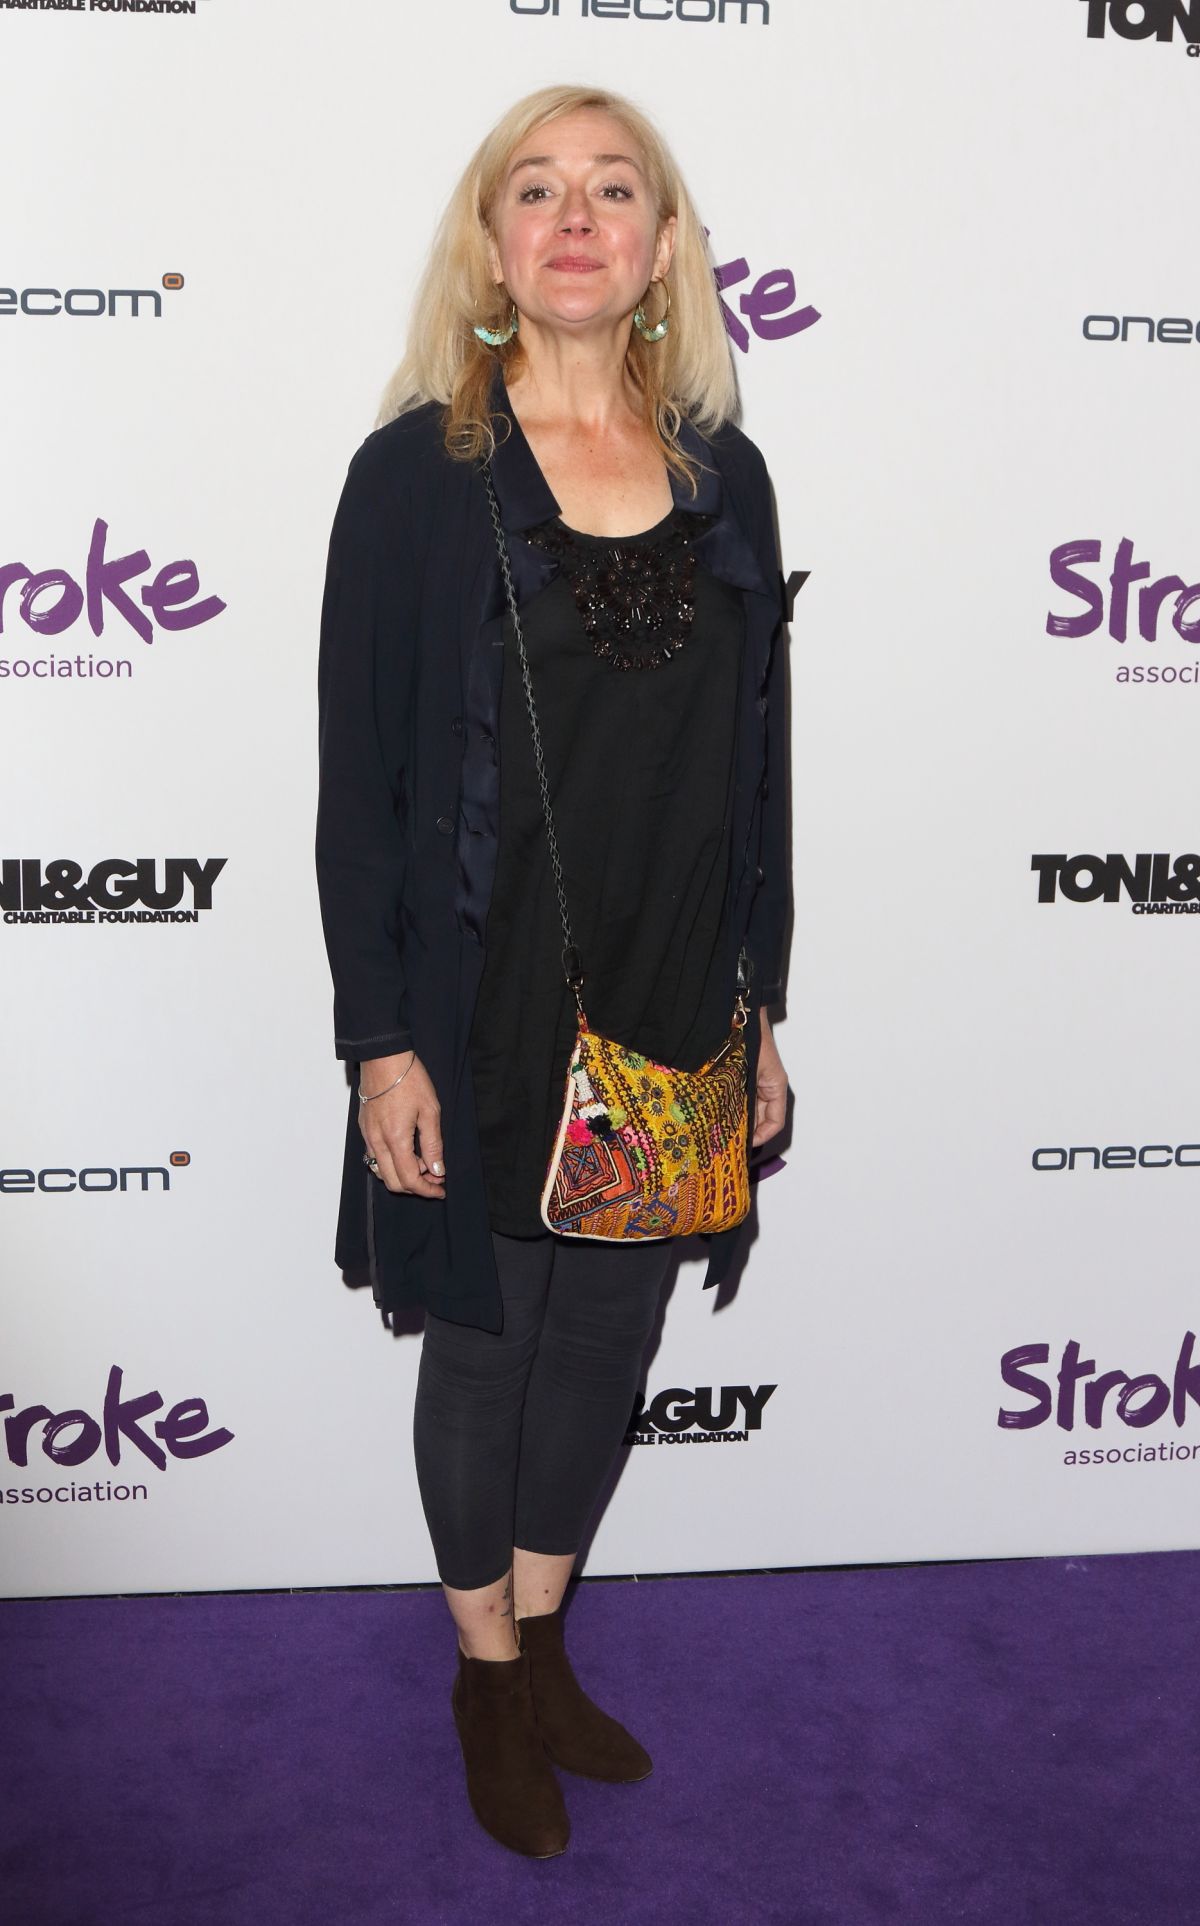 SOPHIE THOMPSON at Life After Stroke Awards in London 11/01/2017 ...